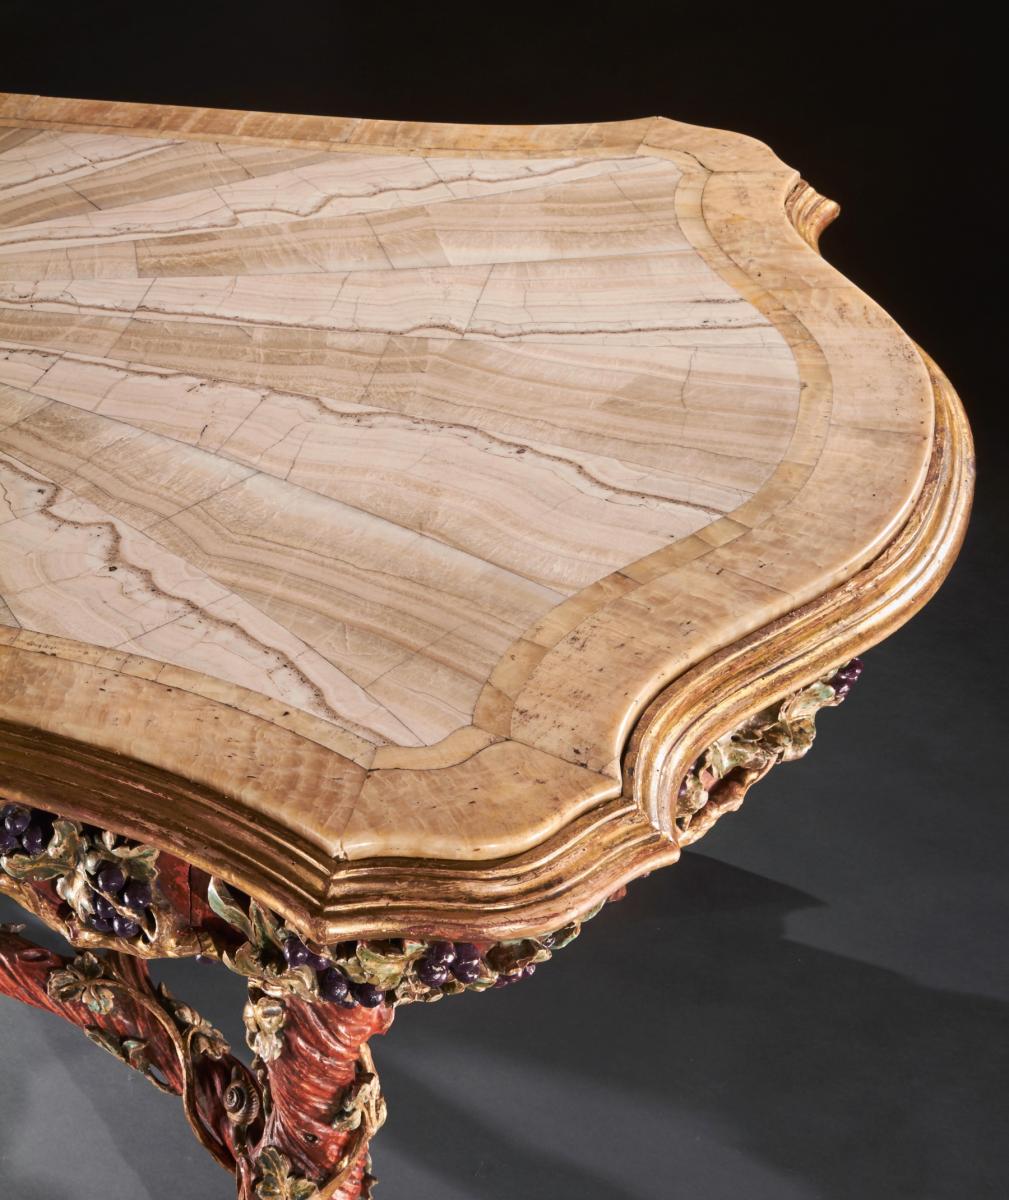 Outstanding Italian Carved Wood Polychrome Centre Table With Onyx Top By Amulet Bertoni